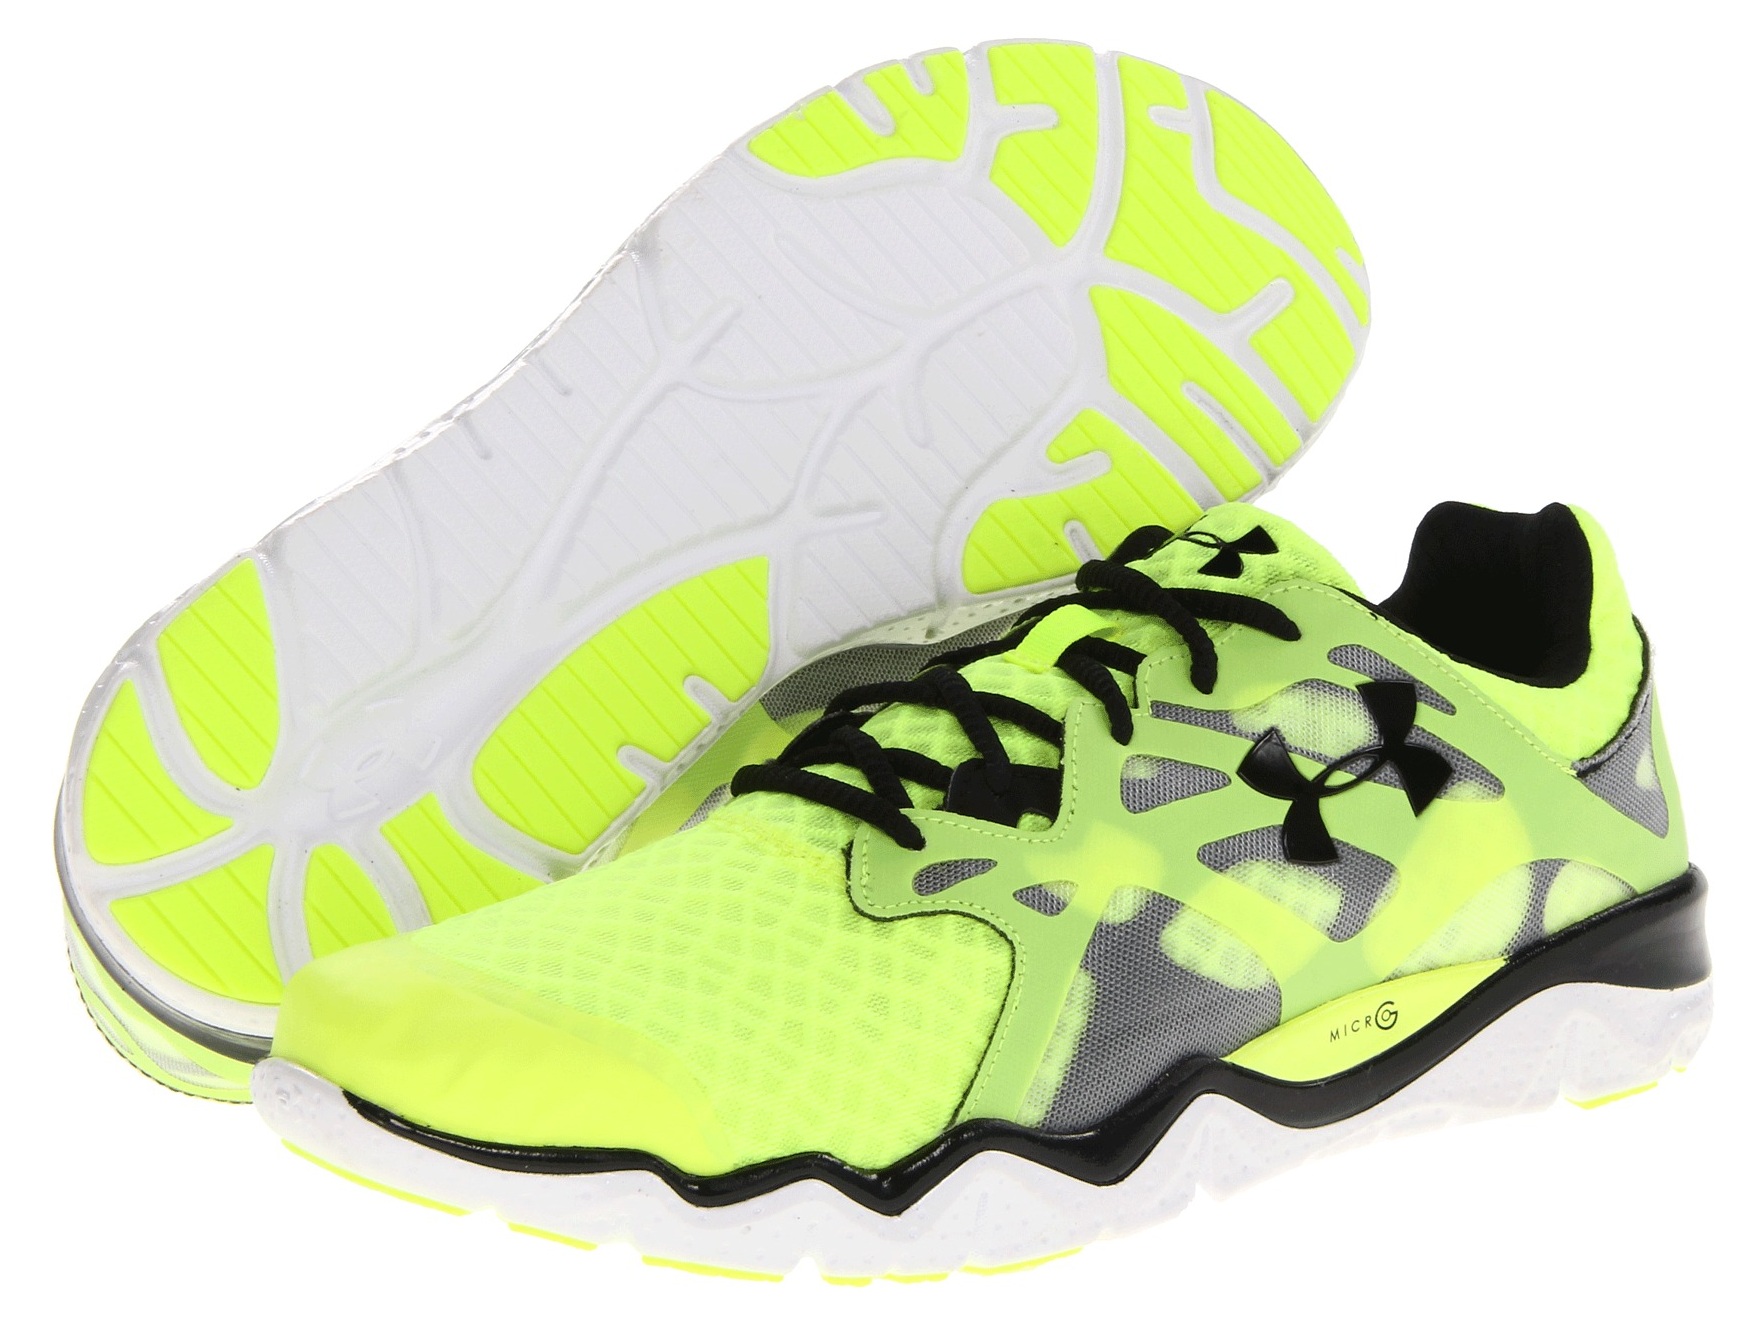 Anormal manguera peor Under Armour Micro G Monza – Gadgets para Correr